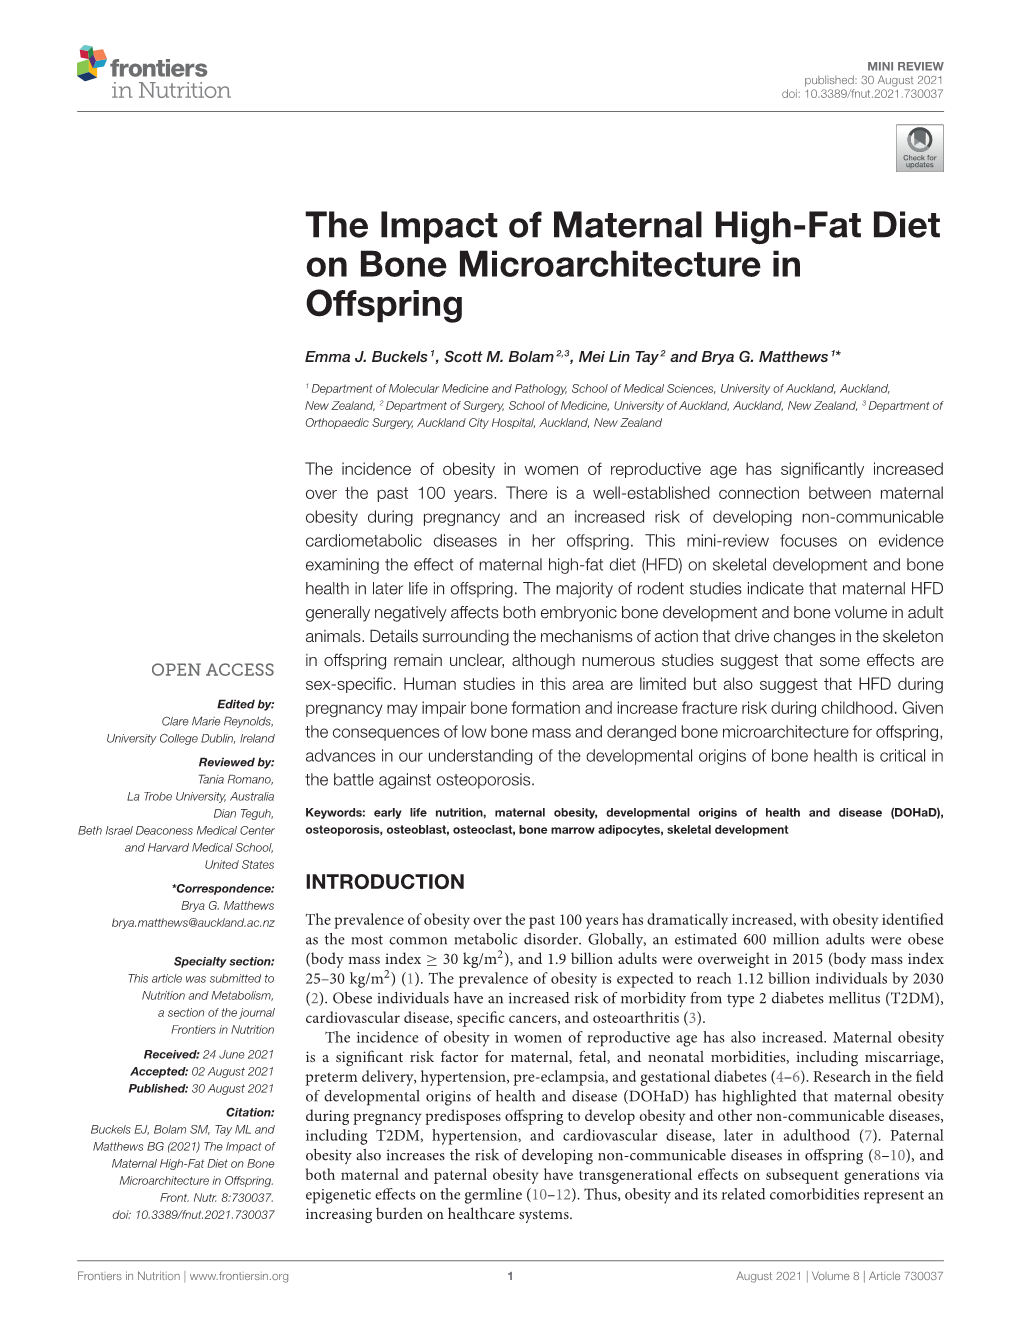 The Impact of Maternal High-Fat Diet on Bone Microarchitecture in Offspring